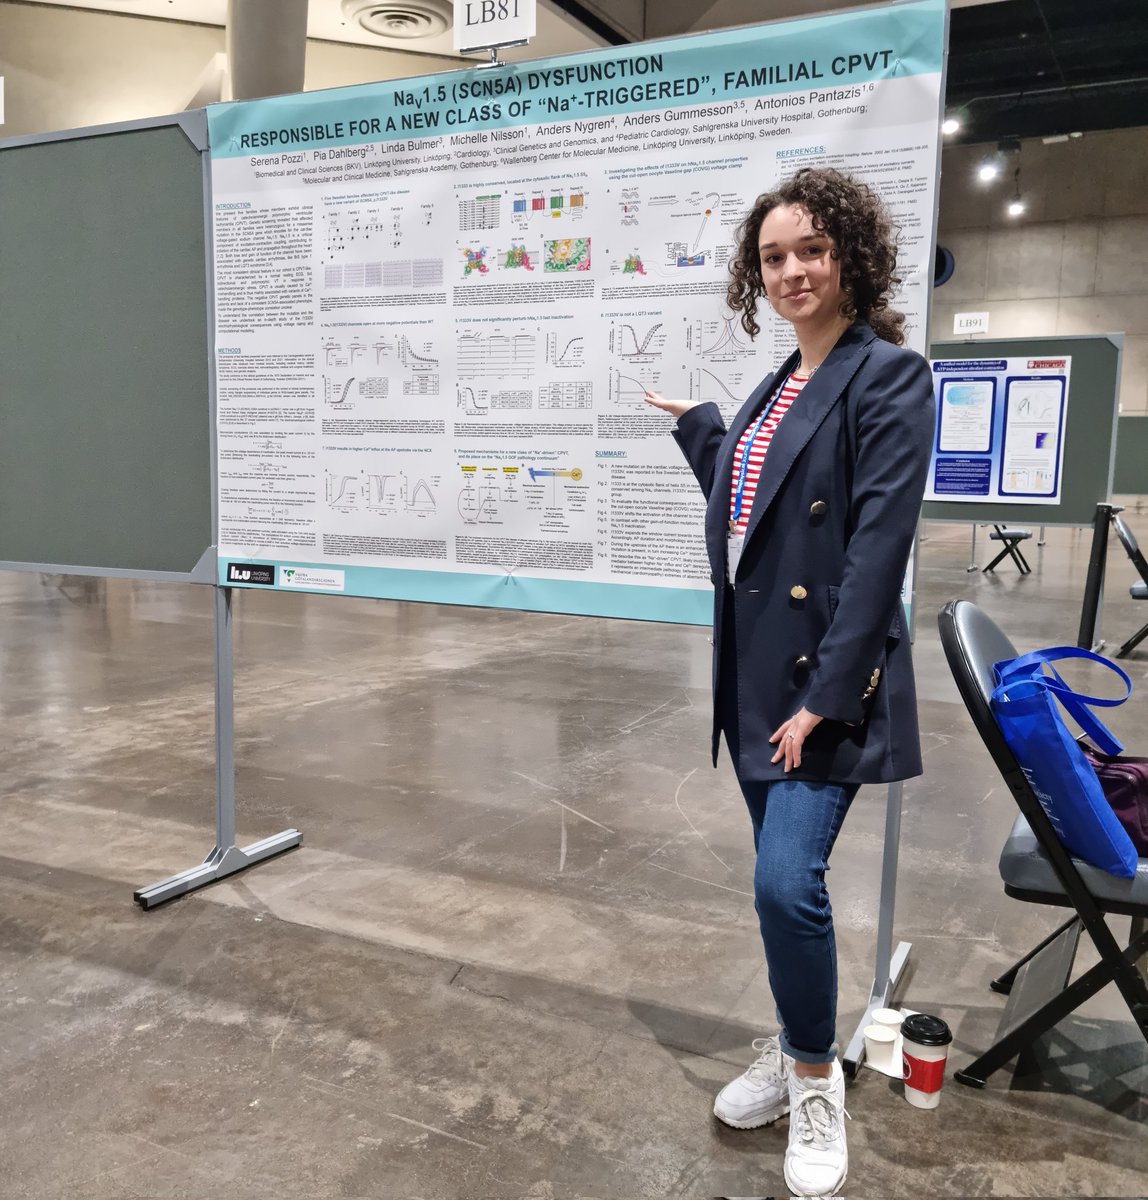 After my first poster presentation and my first #BPS2023 I want to thank everyone that came by and gave interesting suggestions!
Stay tuned if you want to know more about the new Na-triggered CPVT. And check the amazing work of the Pantazis's Lab 
@ntoniosPantazis